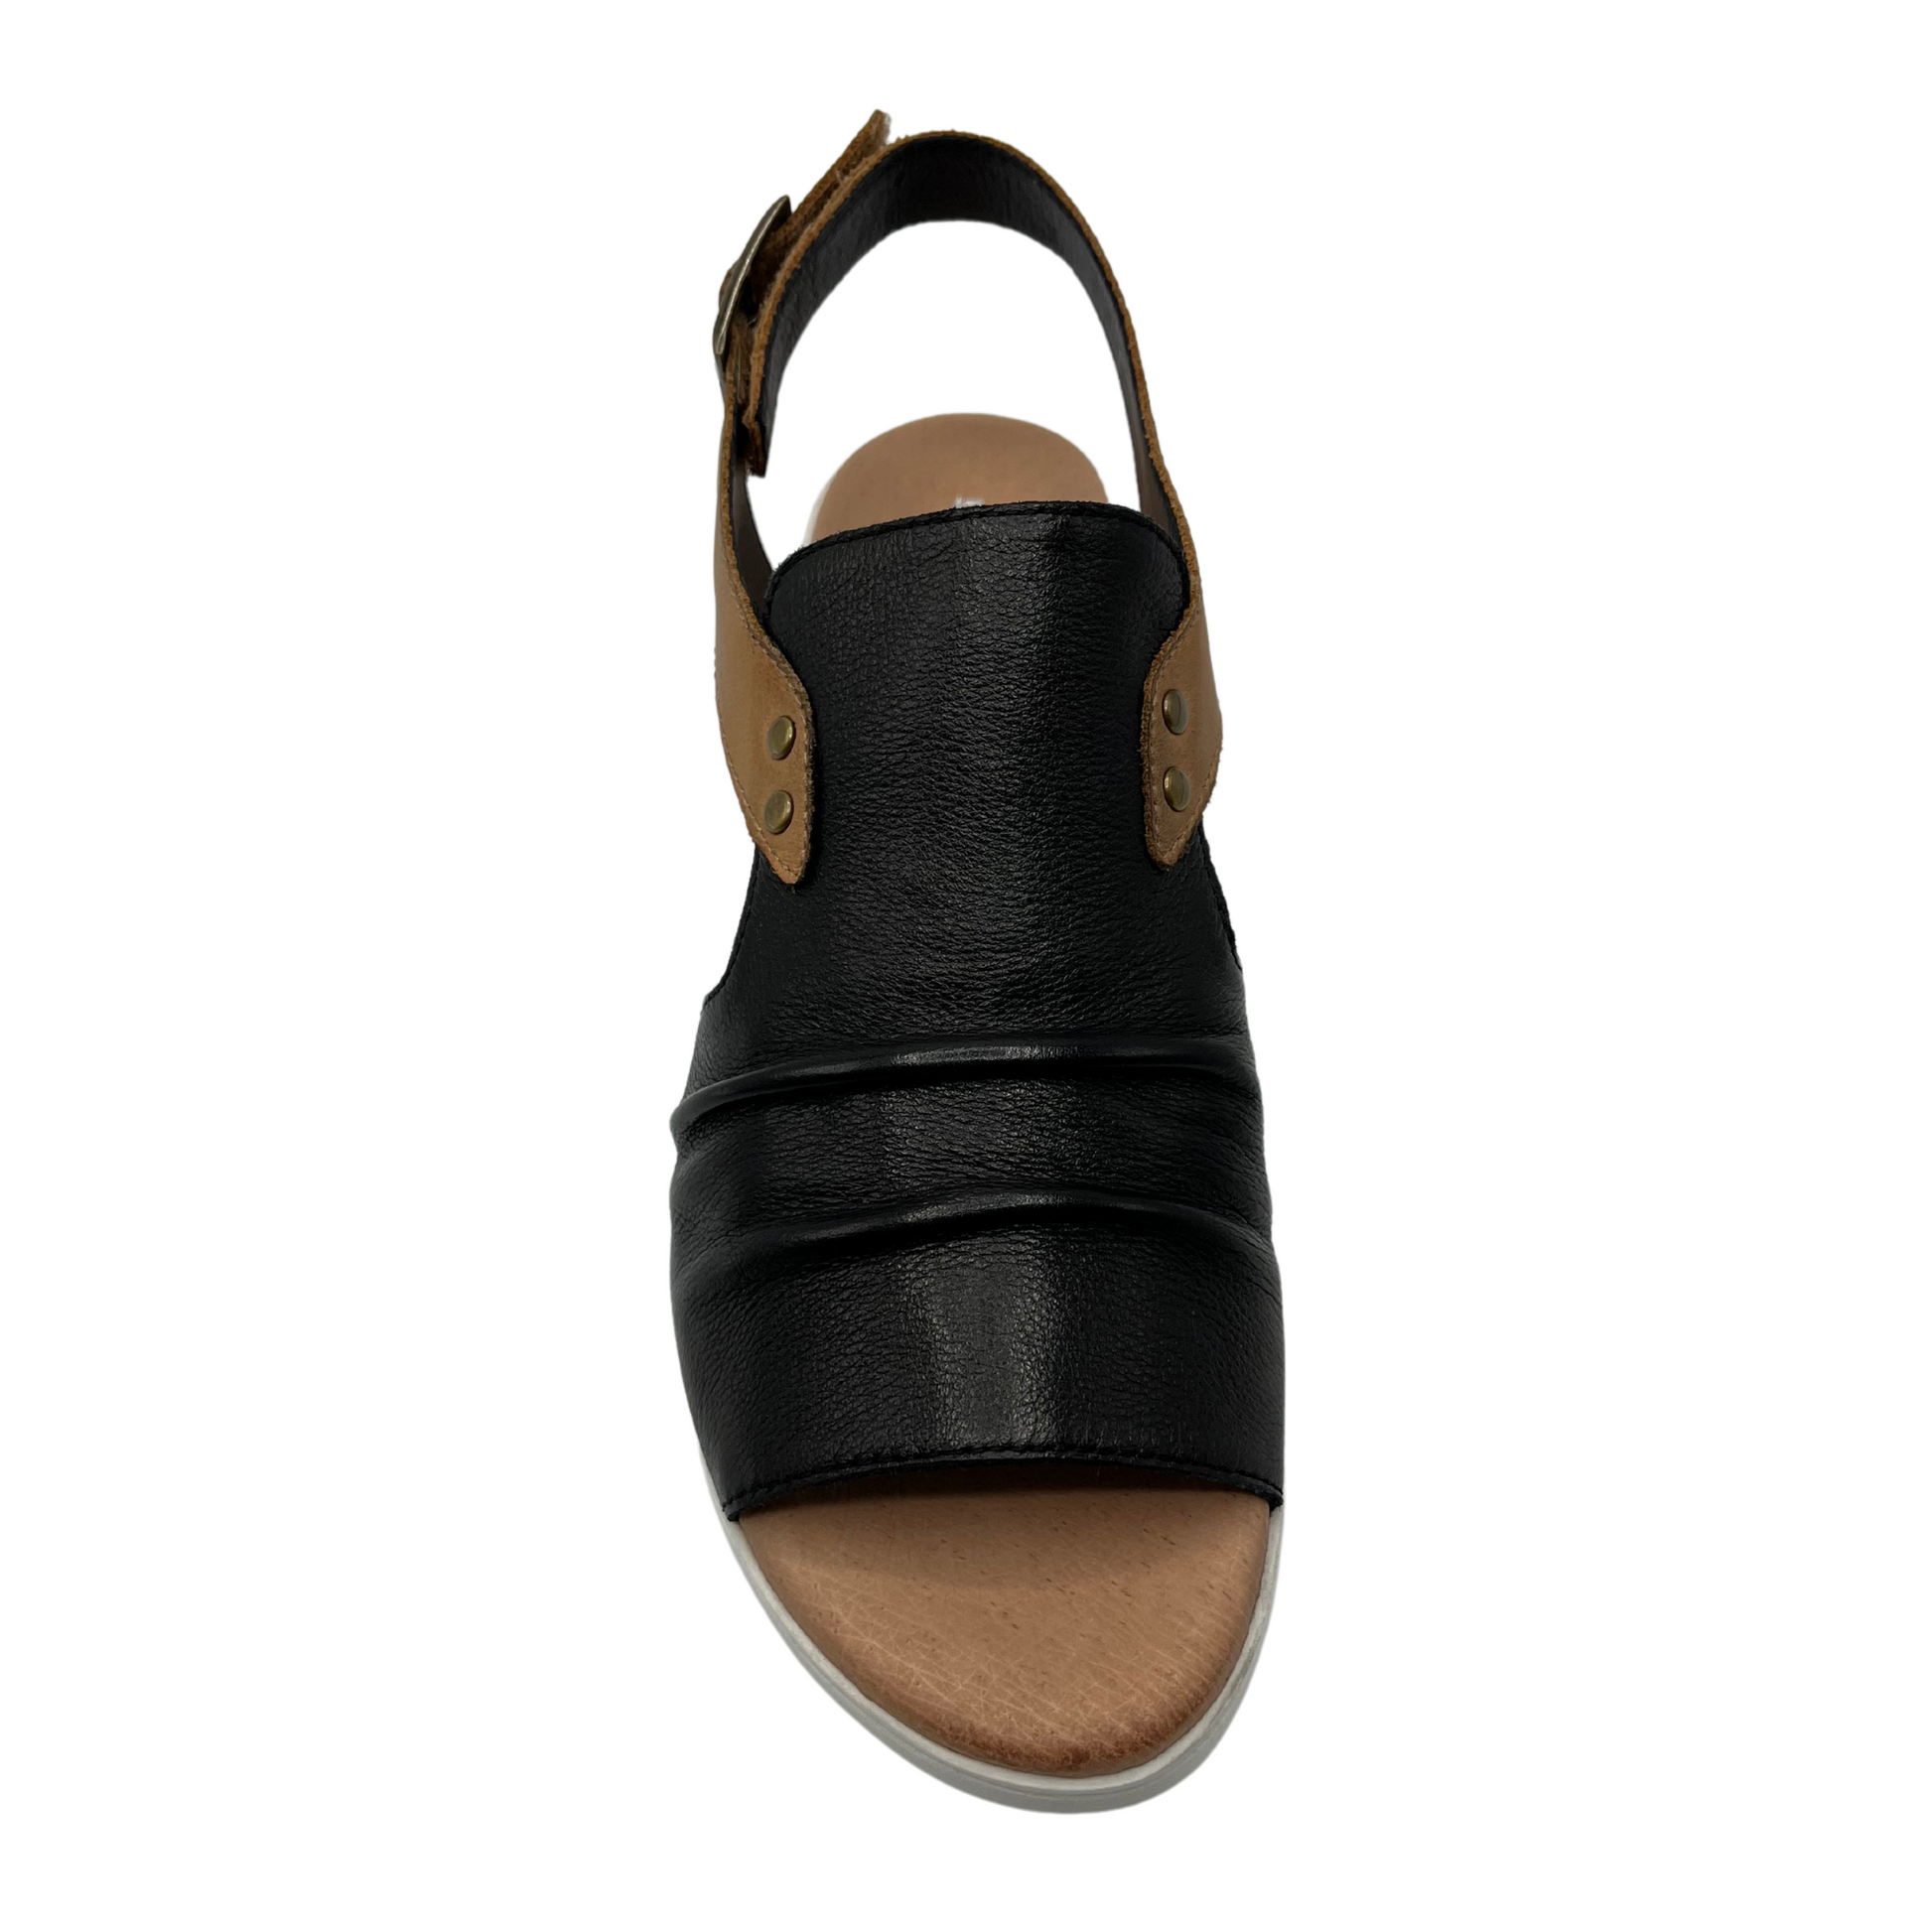 Top view of black leather sandal with brown leather slingback strap